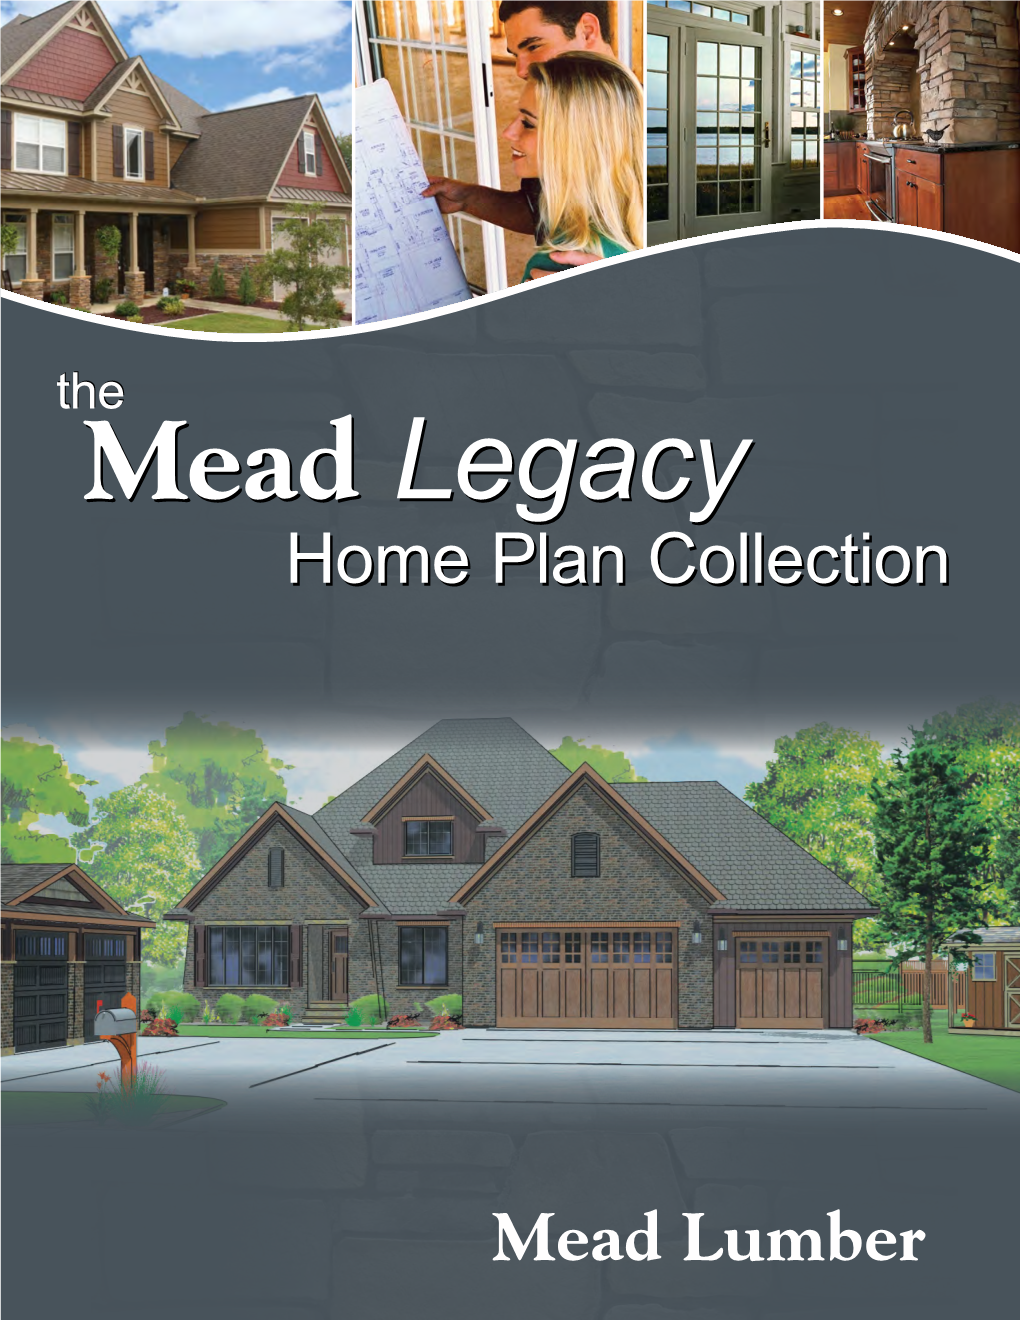 Mead-Legacy-Home-Plan-Collection